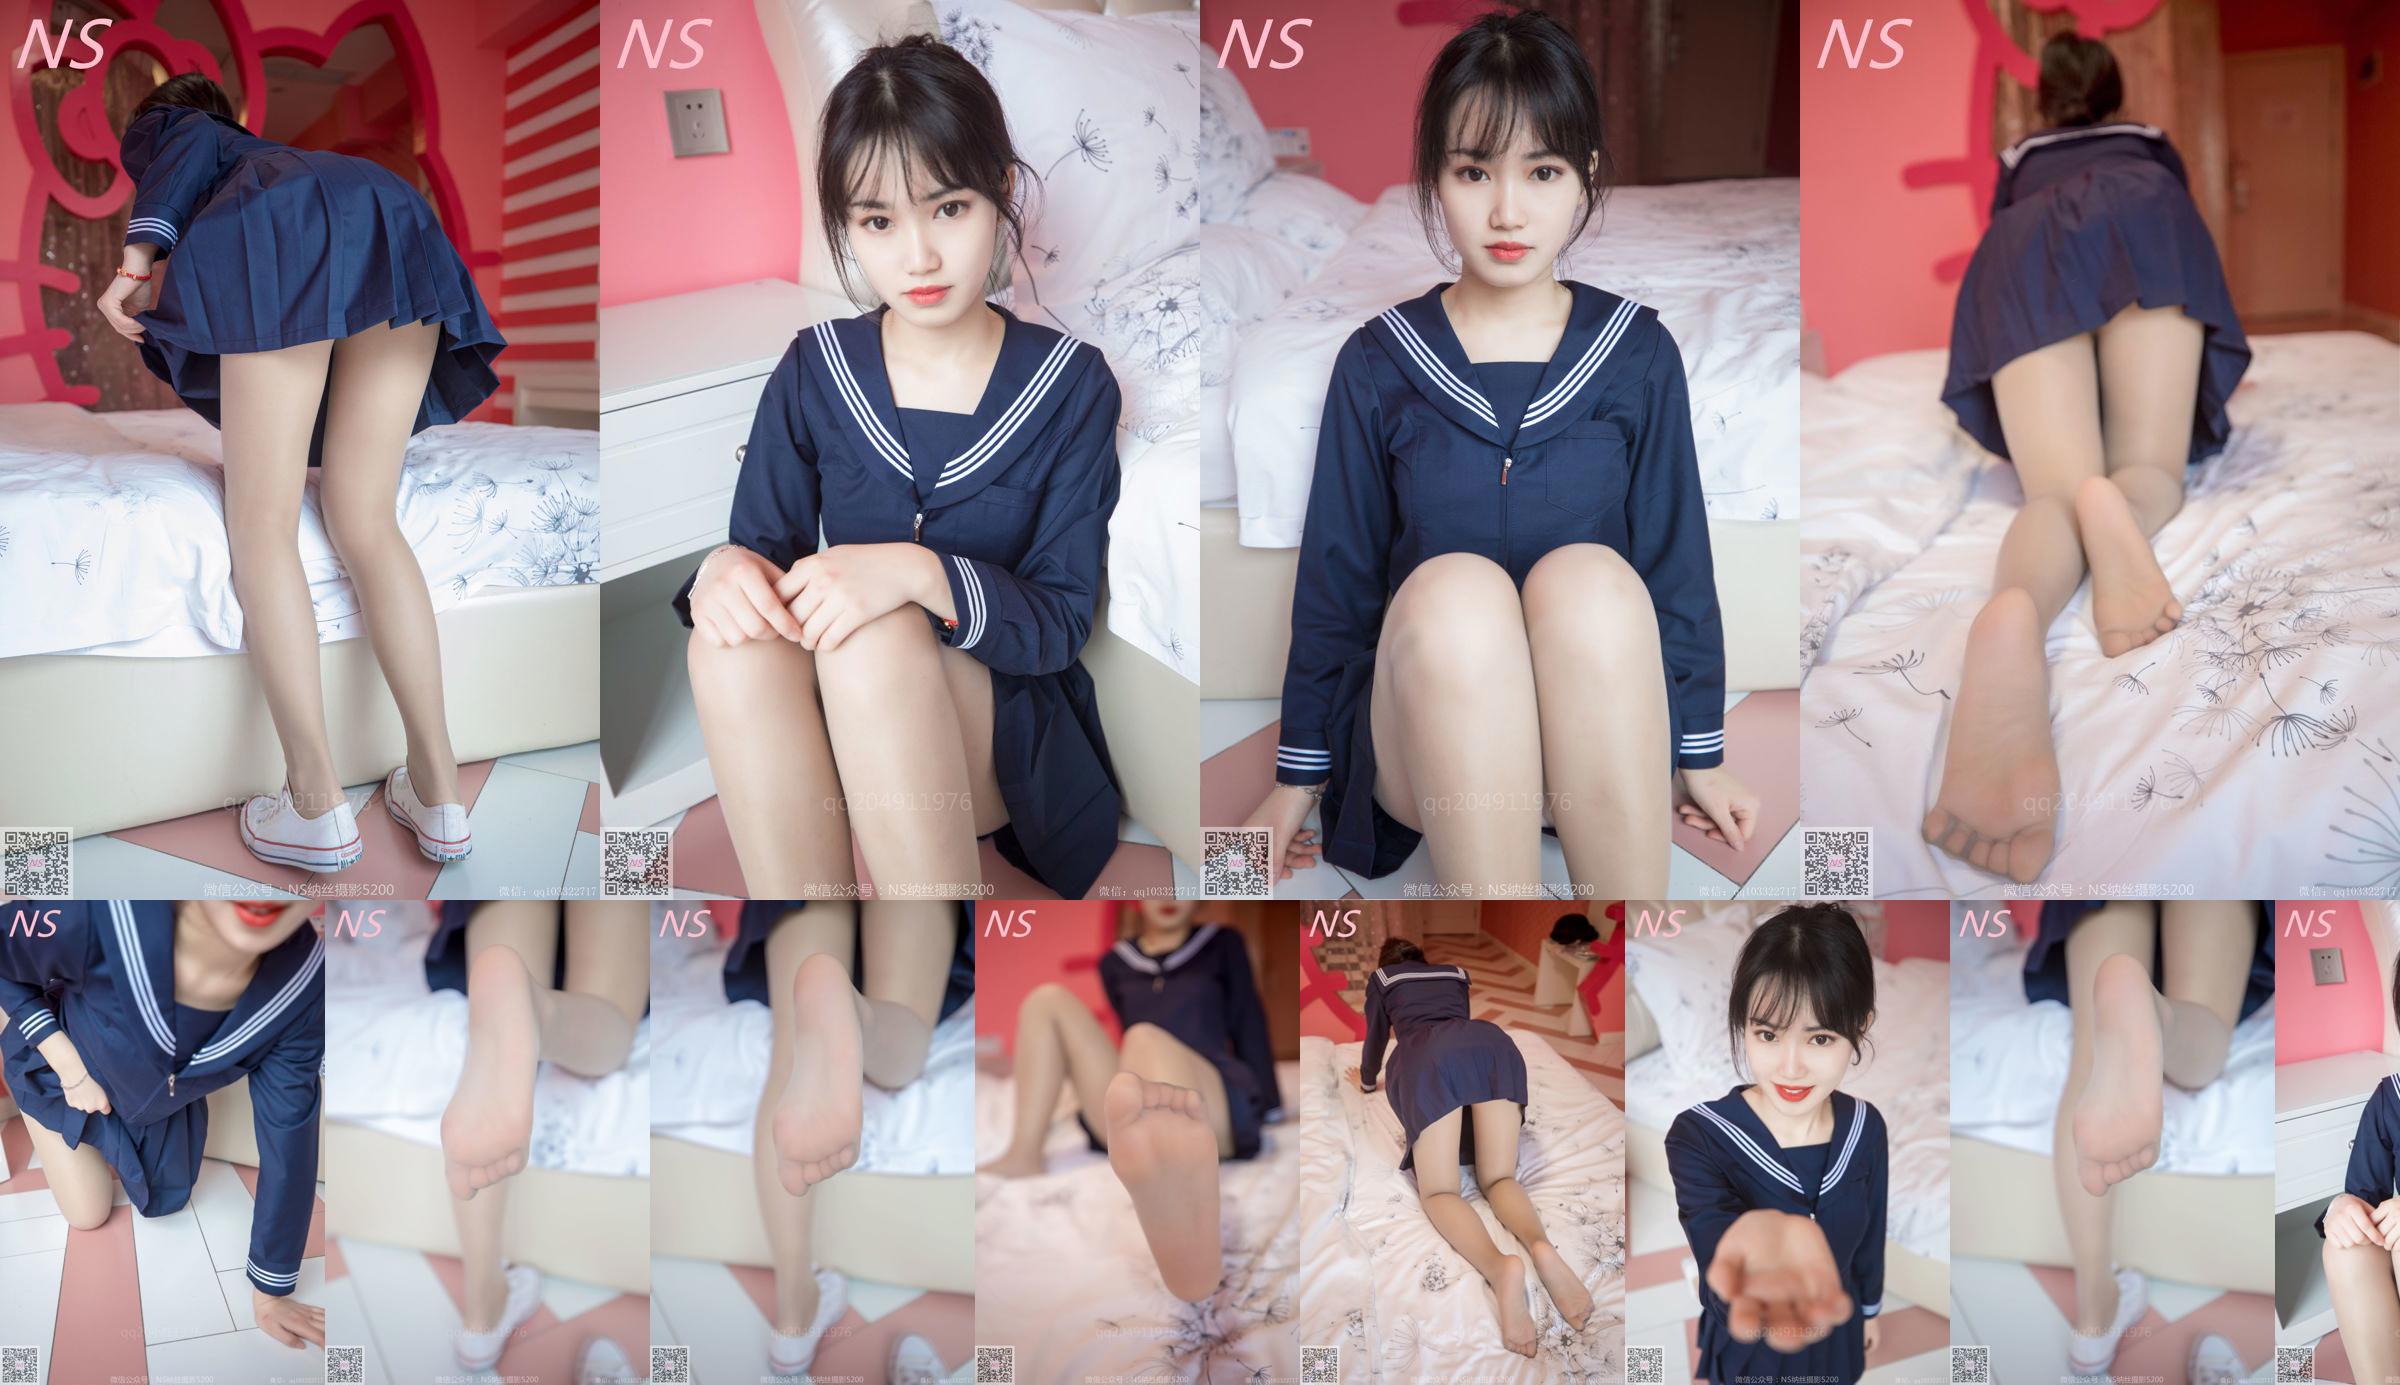 Momo "The Taste of Floral Fragrance" [Nasi Photography] No.b48a21 Page 42